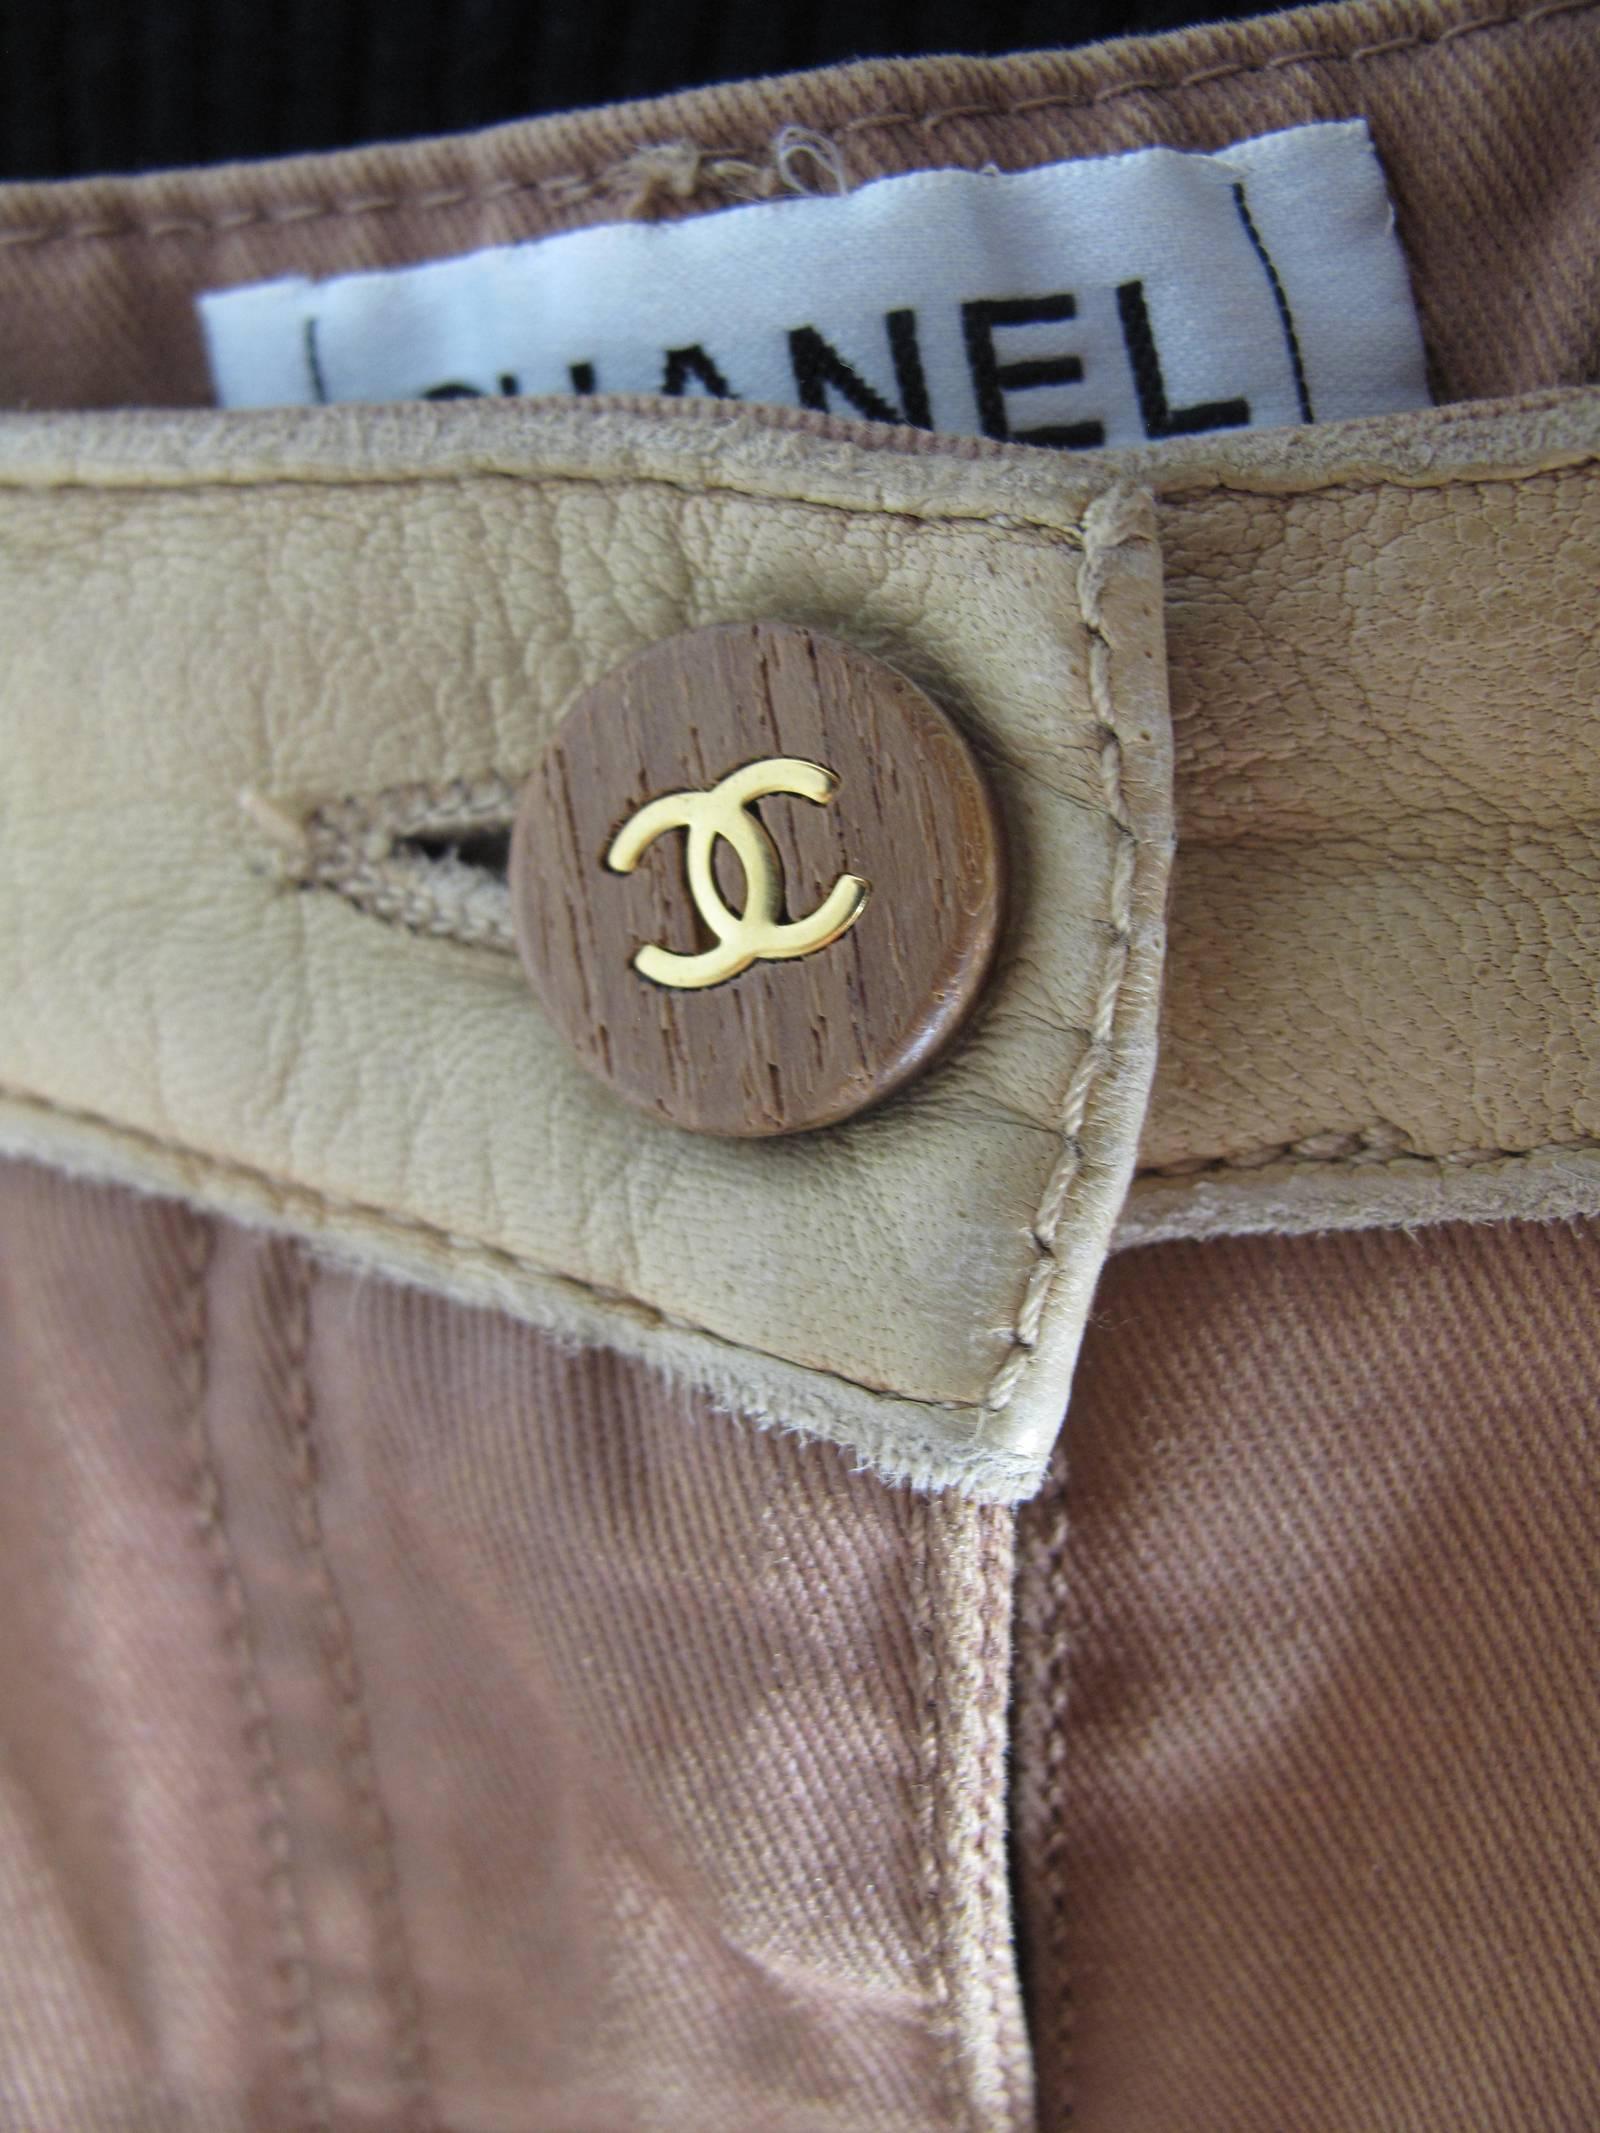 Chanel Denim and Leather Jeans - sale 1